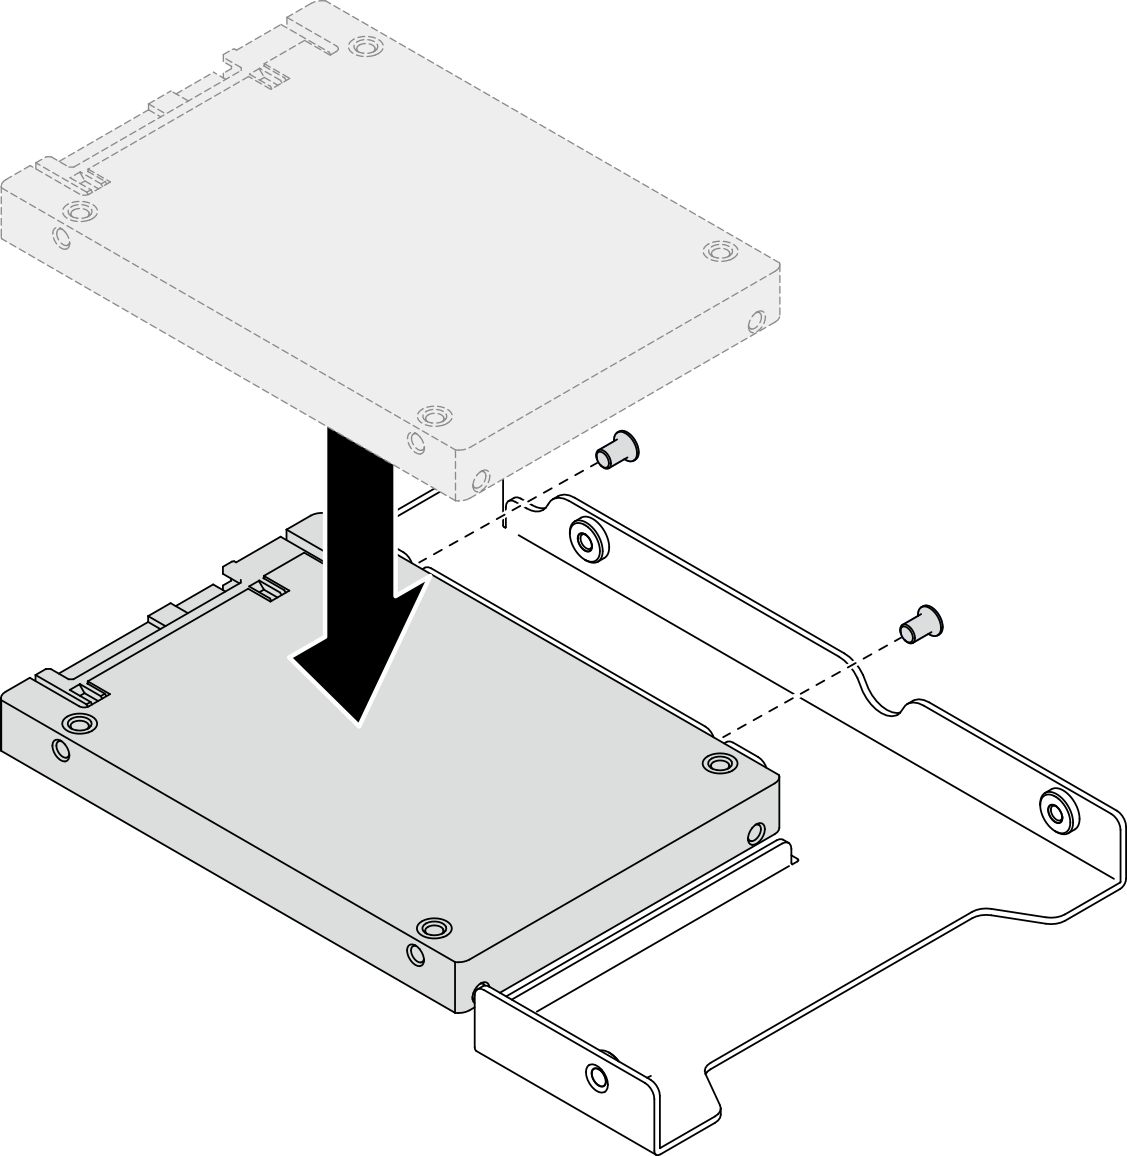 2.5-inch drive installation to drive adapter